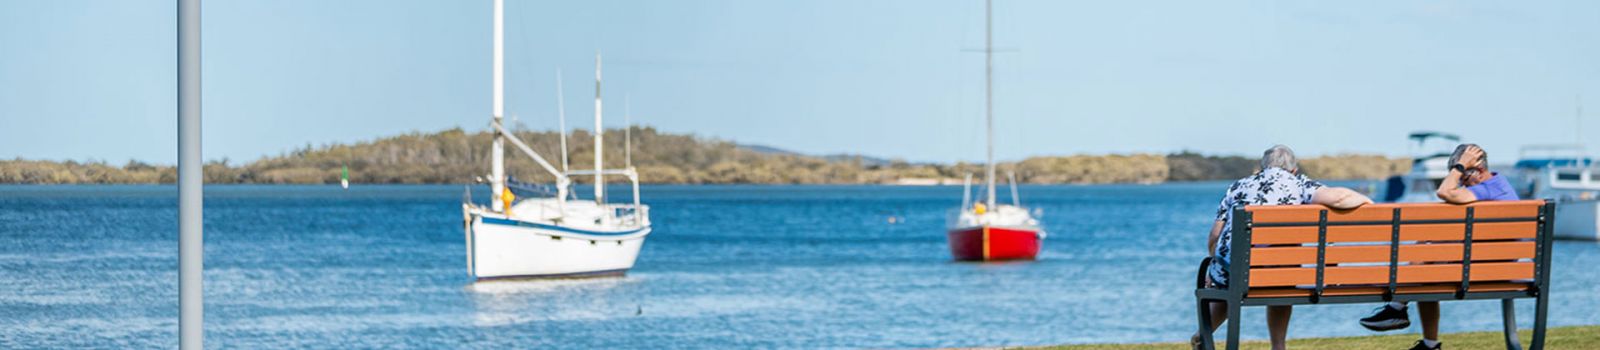 Image of two men sitting on a park bench overlooking a beach with yachts banner image